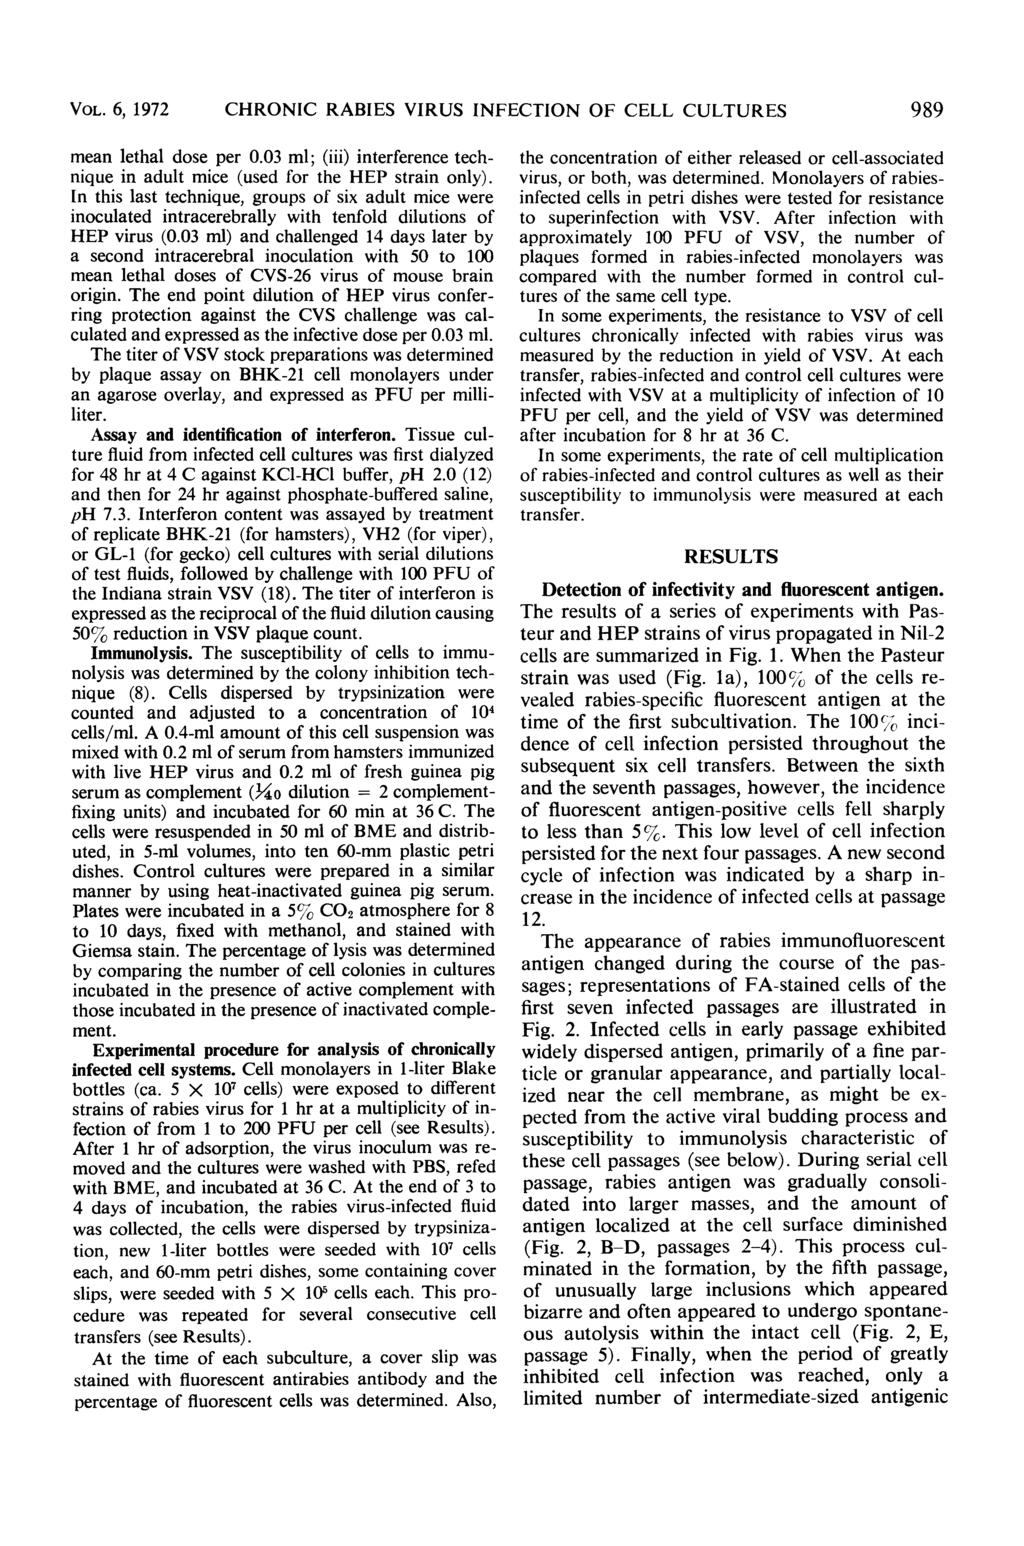 VOL. 6, 1972 CHRONIC RABIES VIRUS INFECTION OF CELL CULTURES 989 mean lethal dose per.3 ml; (iii) interference technique in adult mice (used for the HEP strain only).